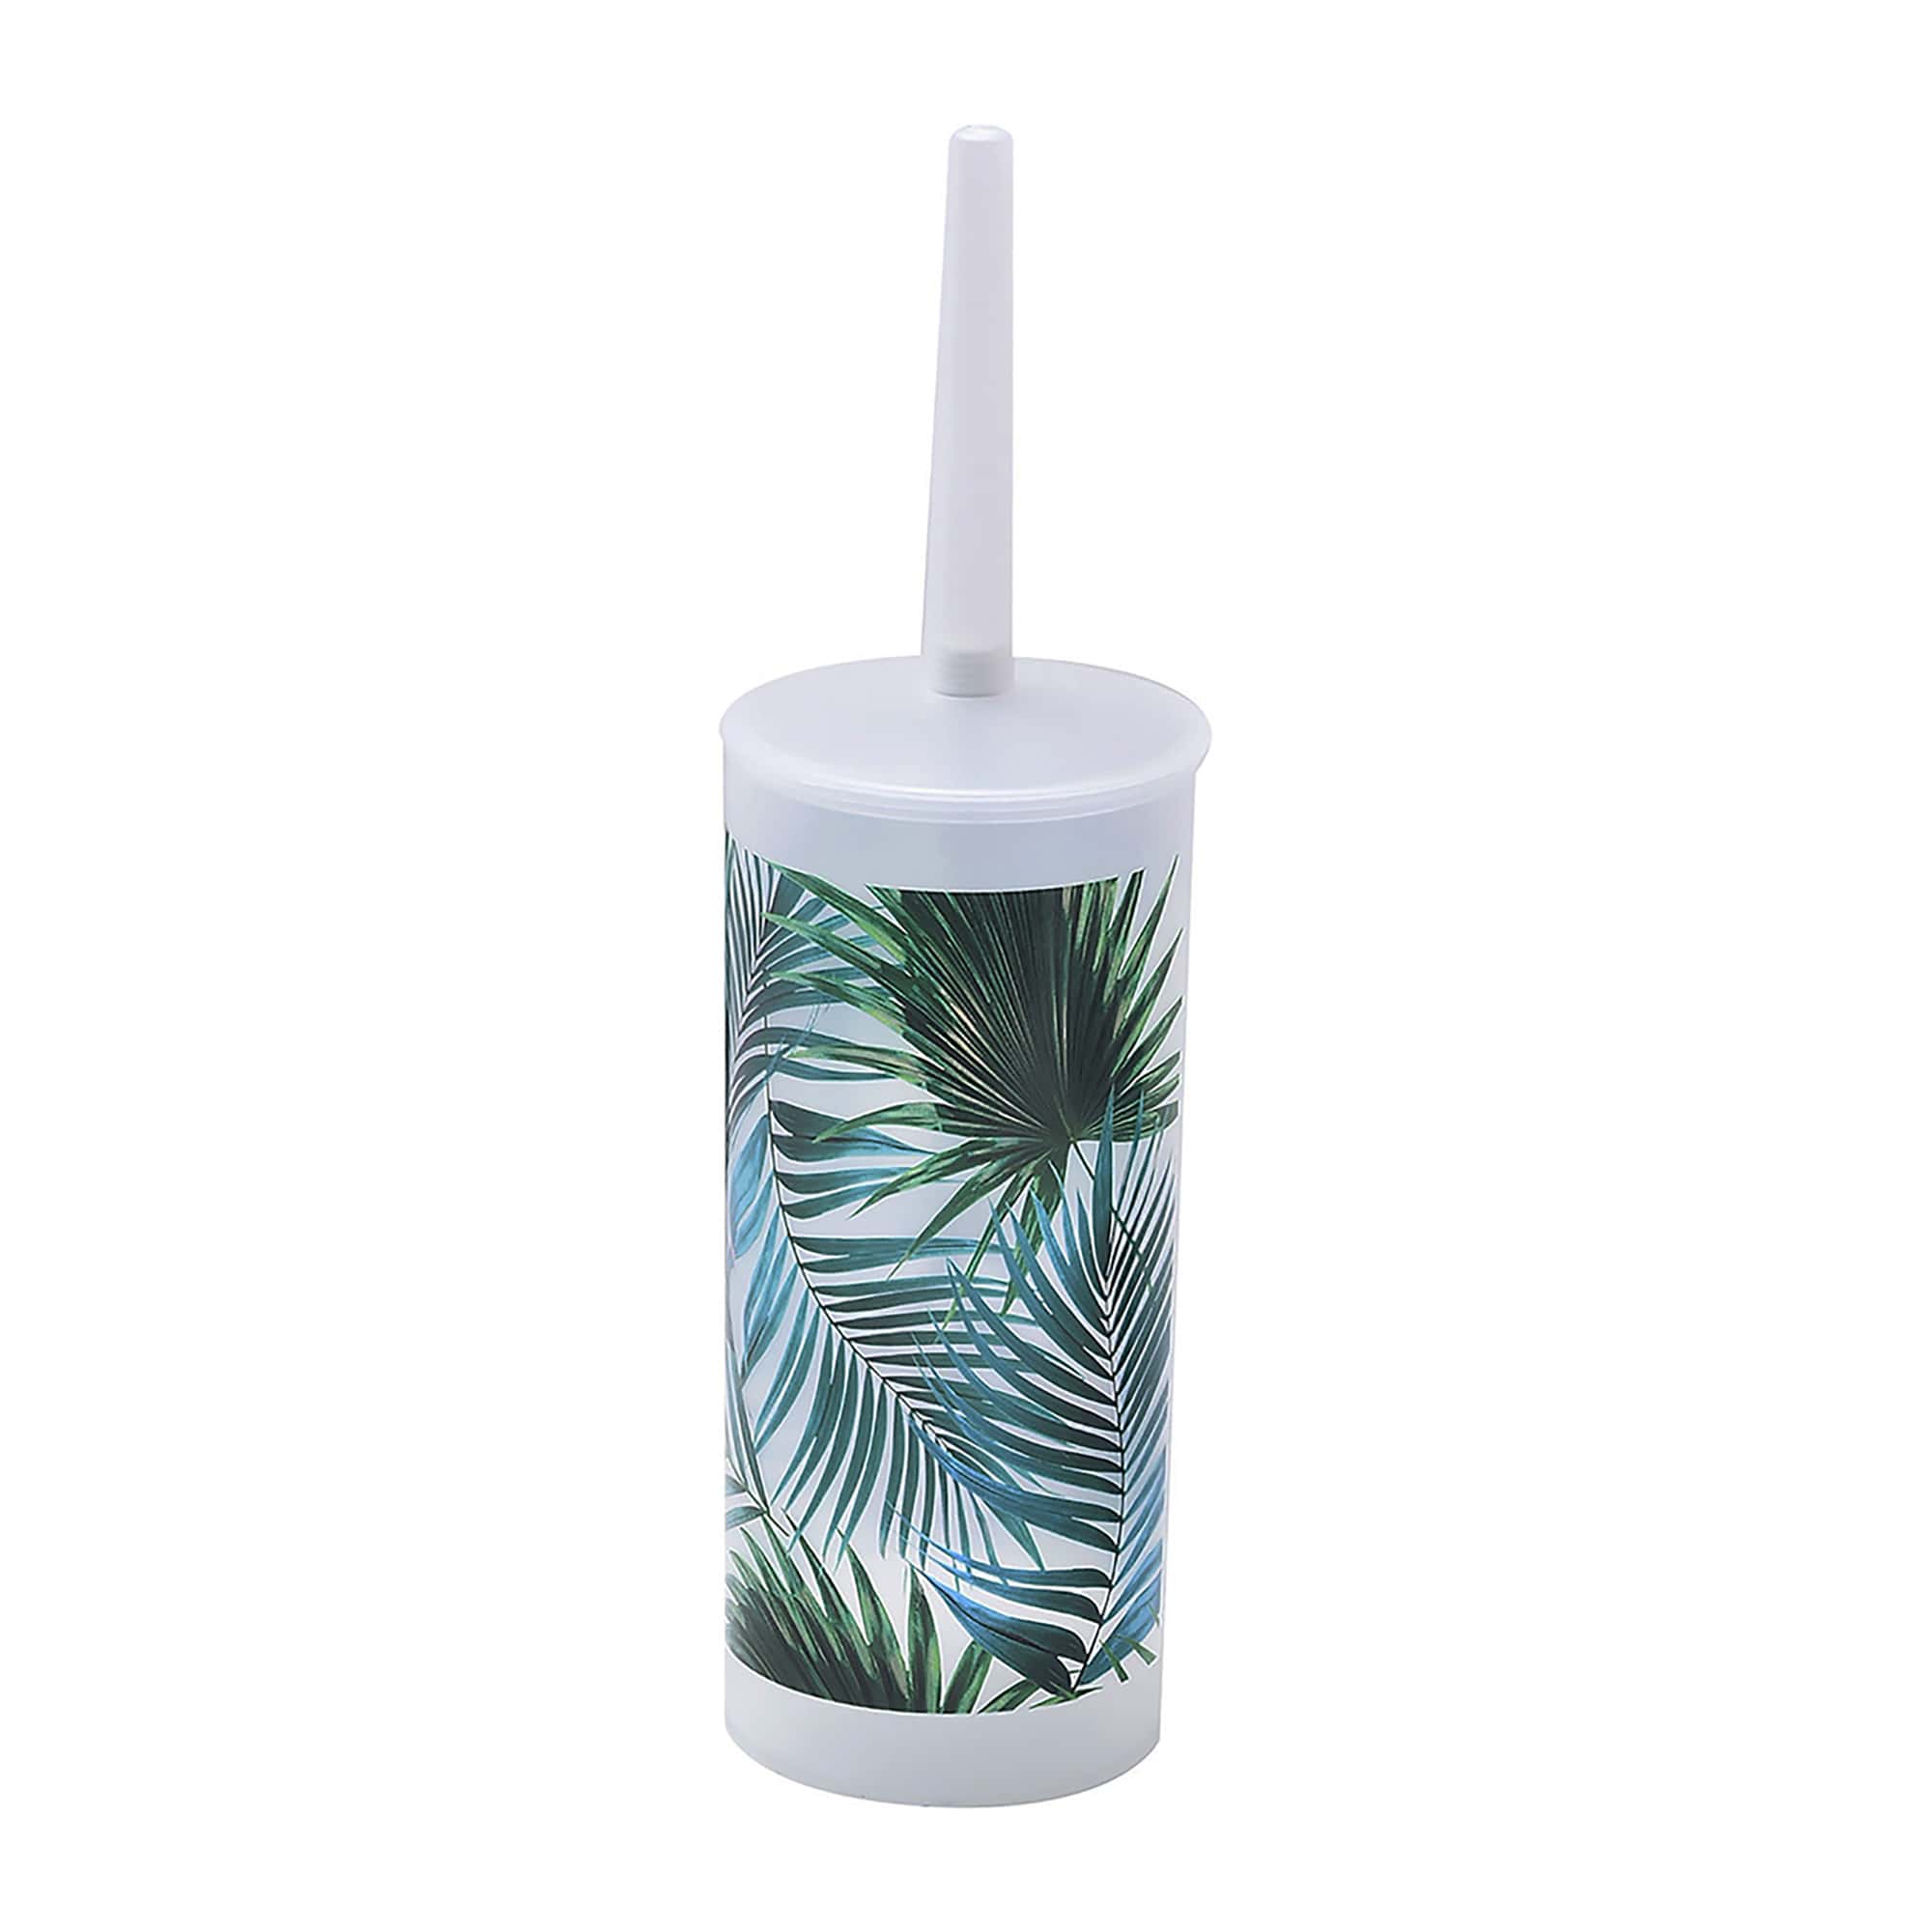 decorative plastic toilet brush and holder with palm leaf design